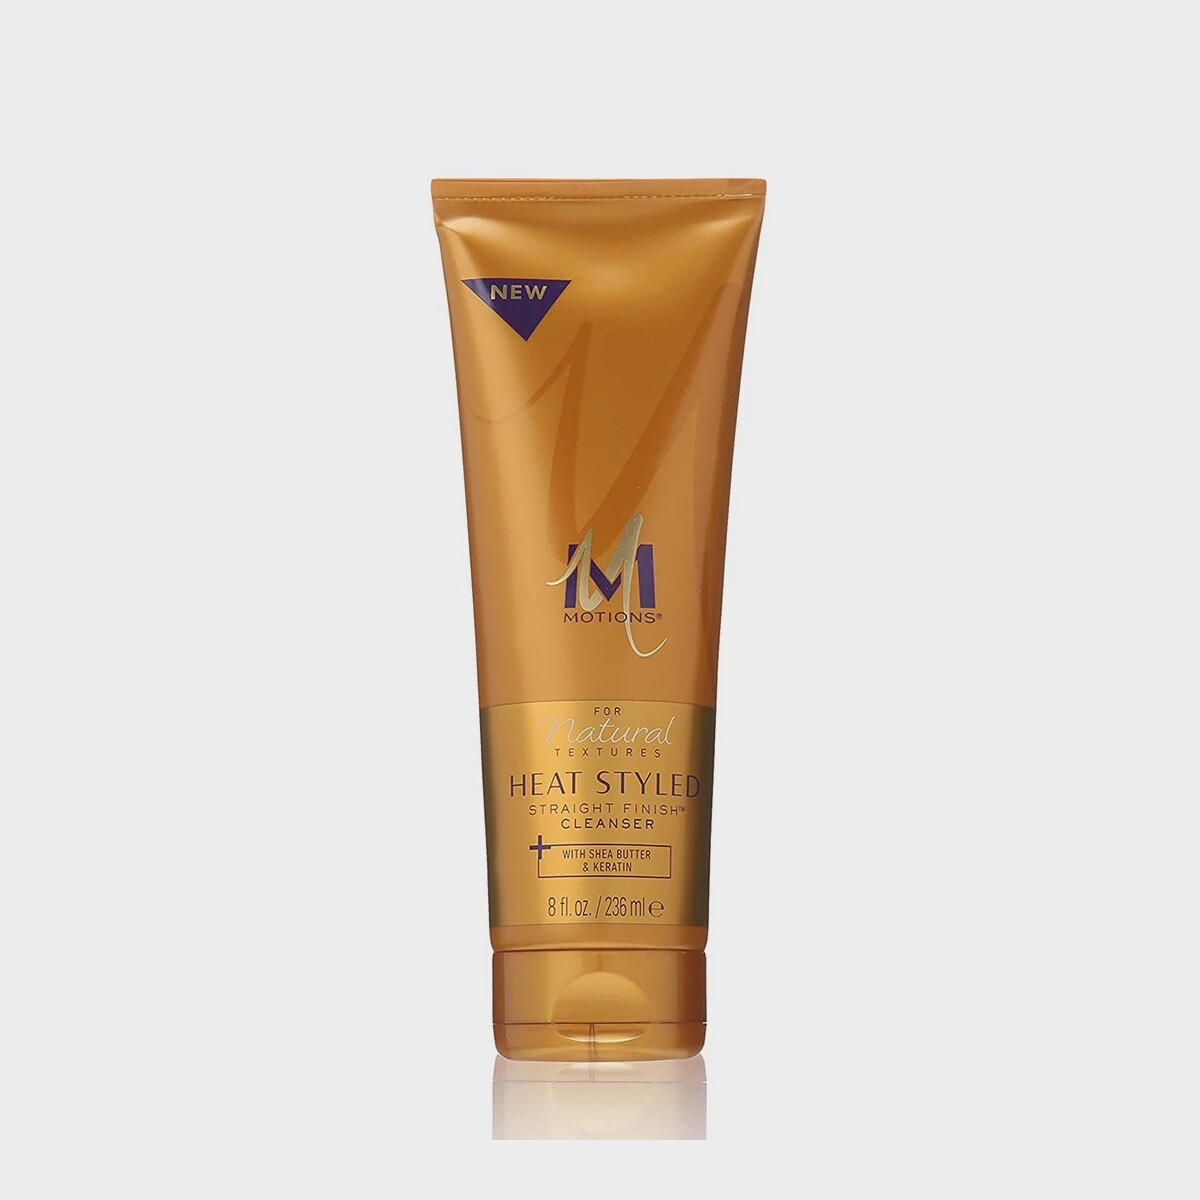 Motions For Natural Textures HEAT STYLED STRAIGHT FINISH CLEANSER